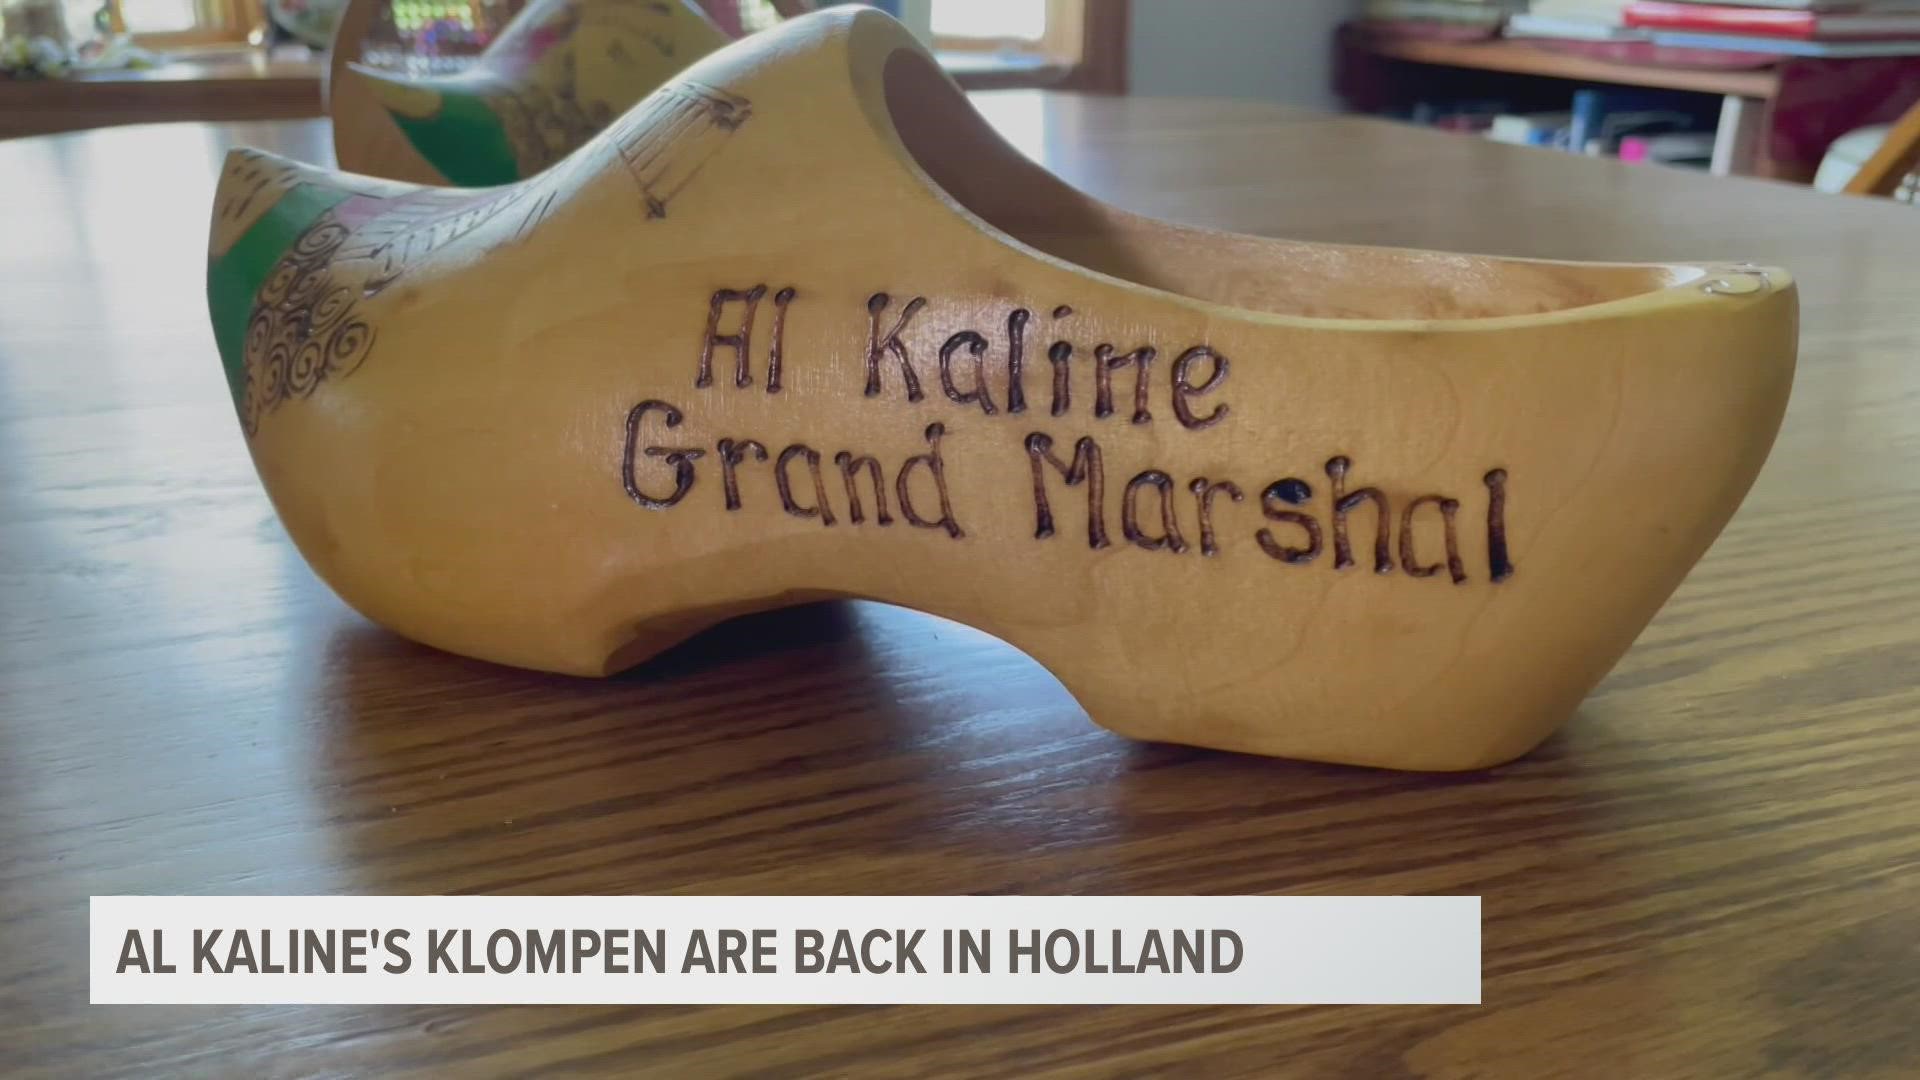 Karl Dykstra scored the shoes in an online auction for less than $400. The shoes will be placed in the Holland Museum for next year's Tulip Time.